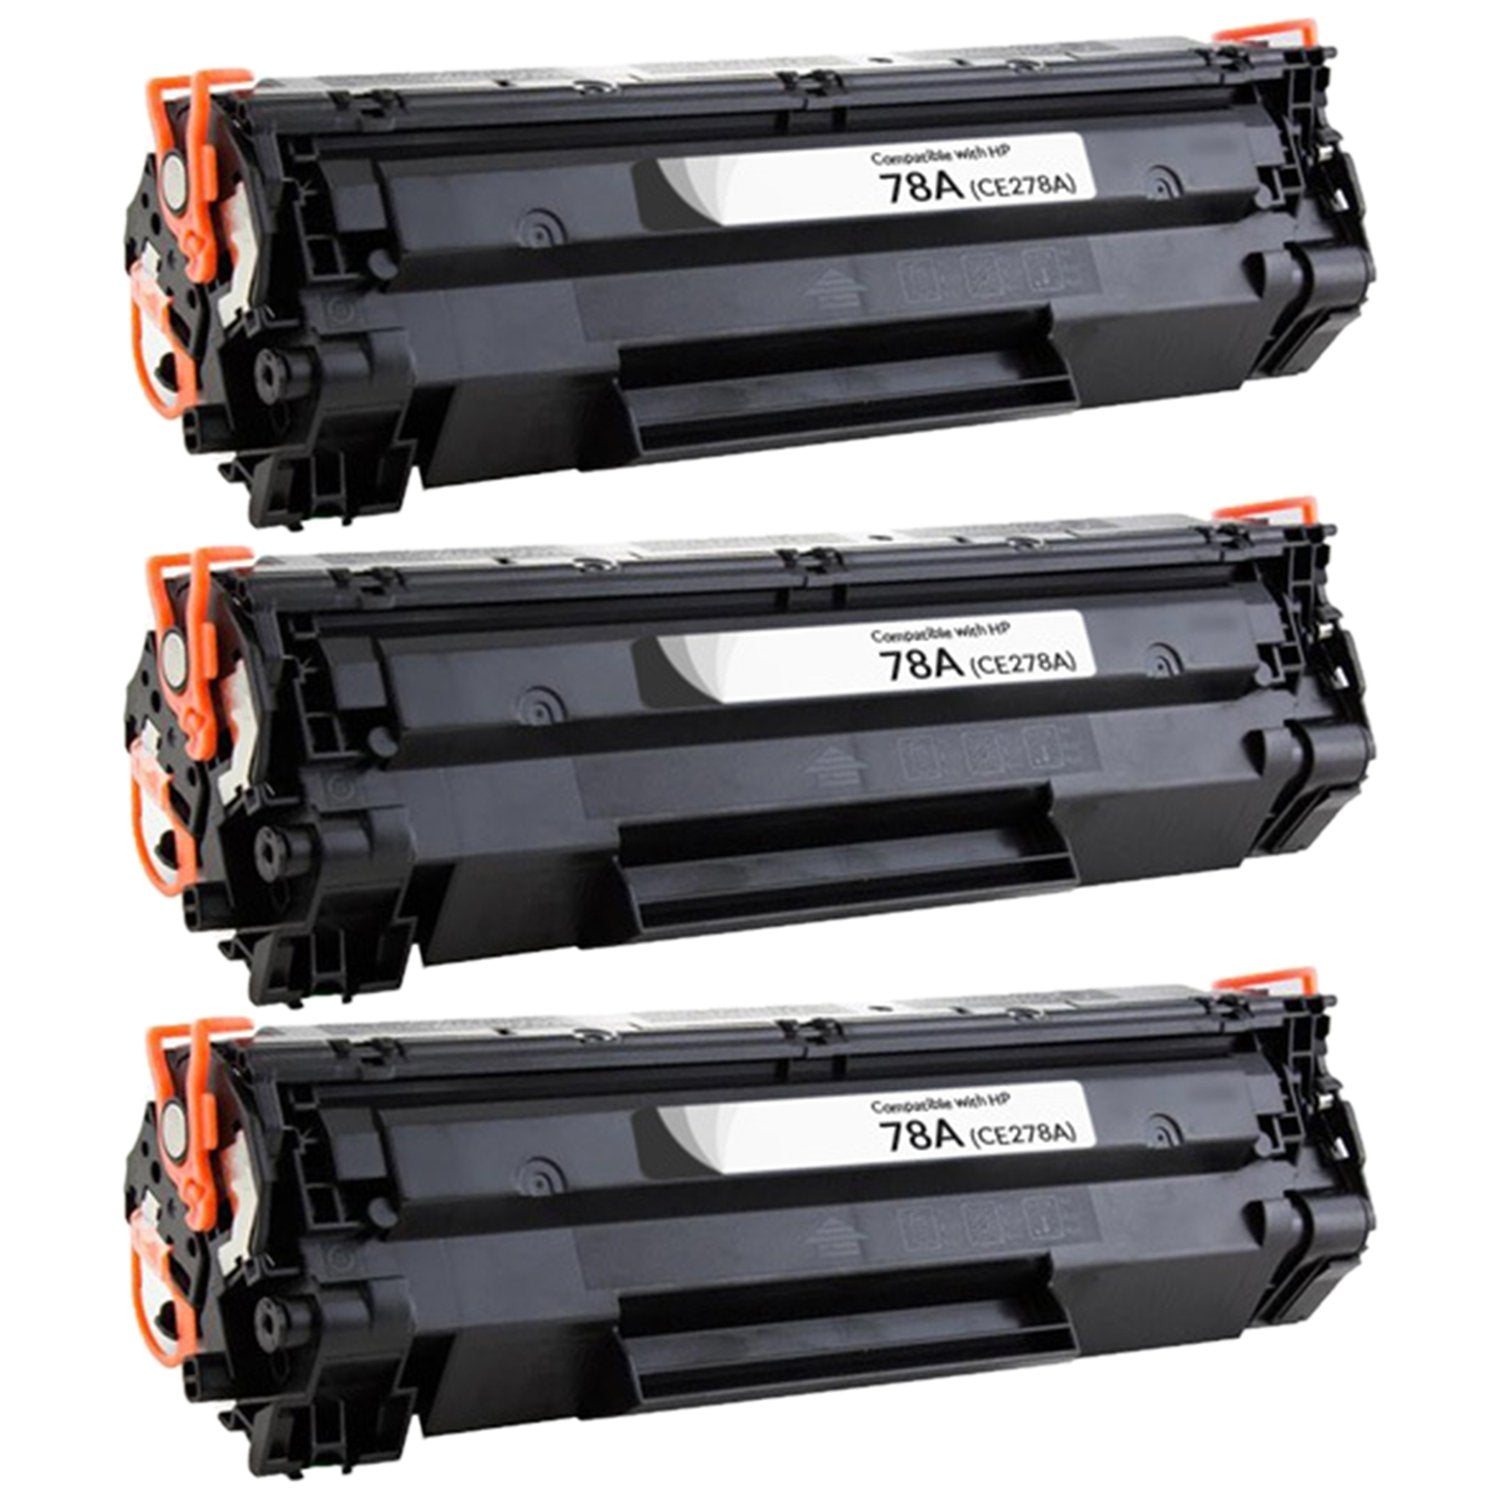 Absolute Toner Compatible CE278A HP 78A Black Toner Cartridge | Absolute Toner HP Toner Cartridges